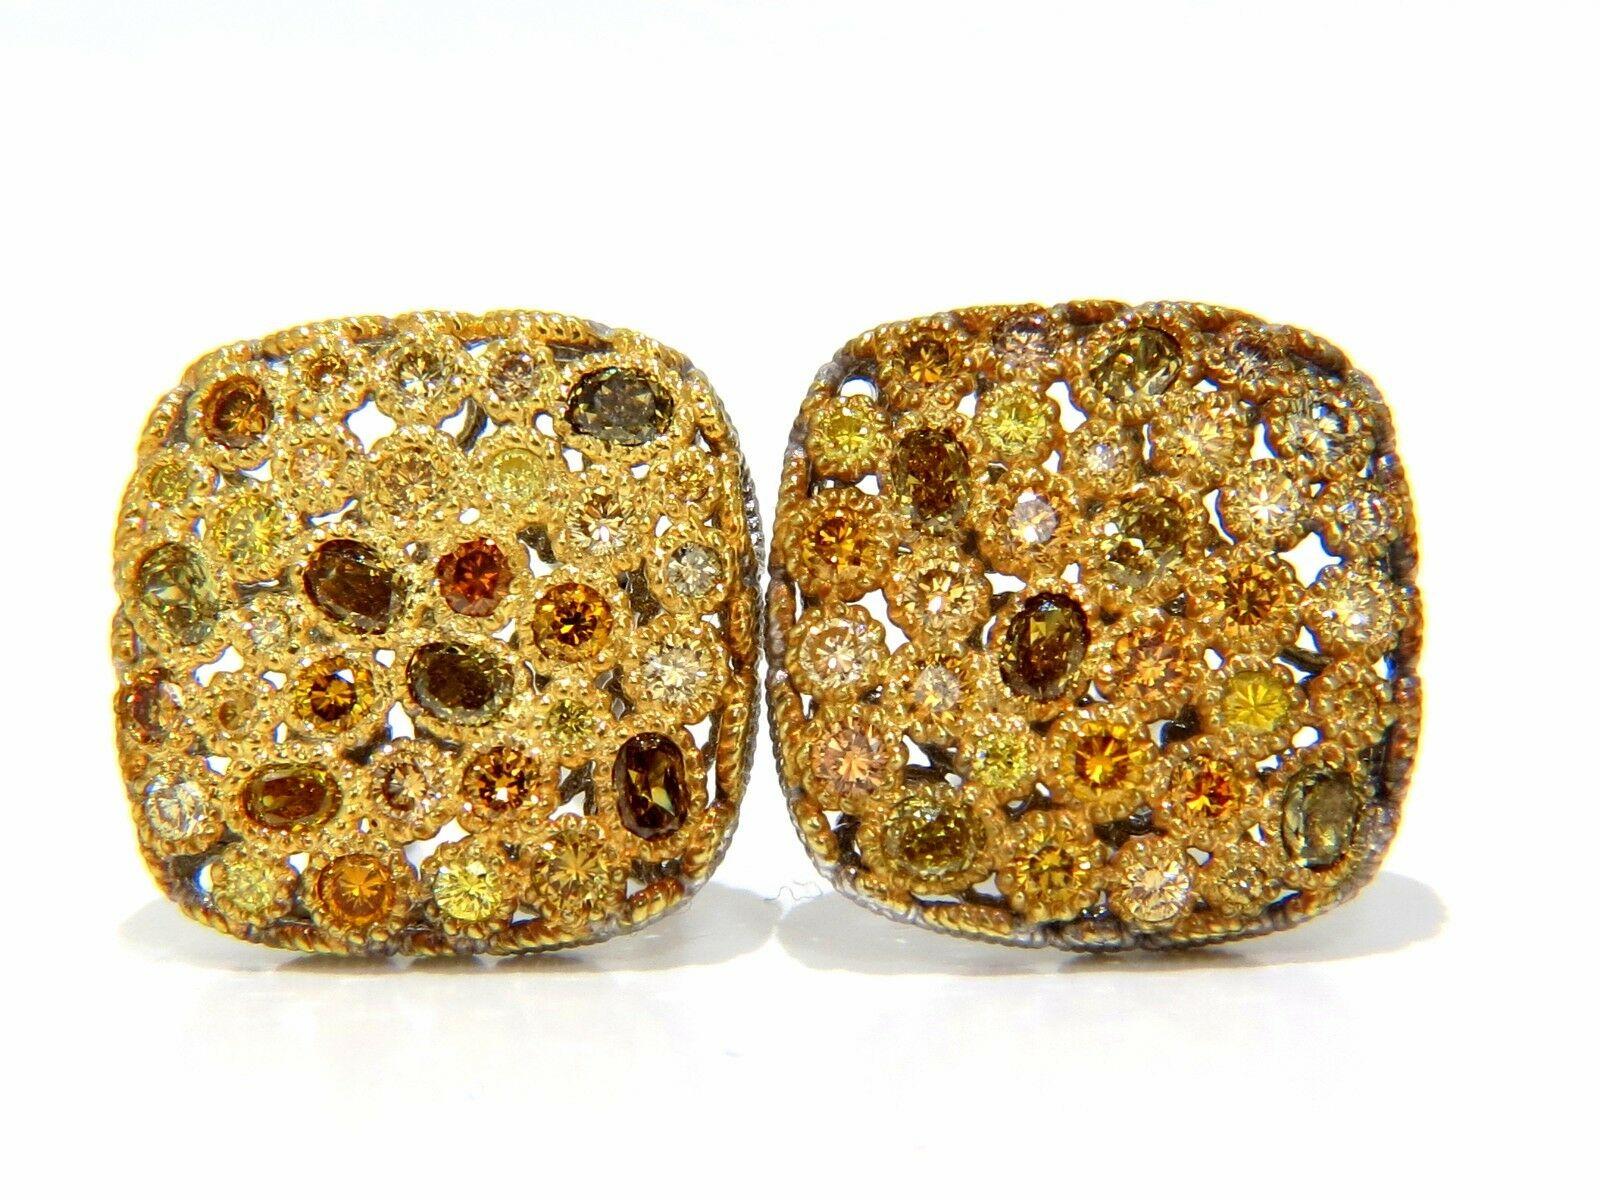 1.60ct. Natural Fancy color diamonds clip earrings.

Fancy Yellow, Orange, Brown, and olive.

Vs-1 Vs-2 & Si-1 clarity.

Oval and rounds, full cuts.

Selected from the finest color diamonds.

8 Grams.

14kt. white gold.

18.2mm Diameter

Comfortable